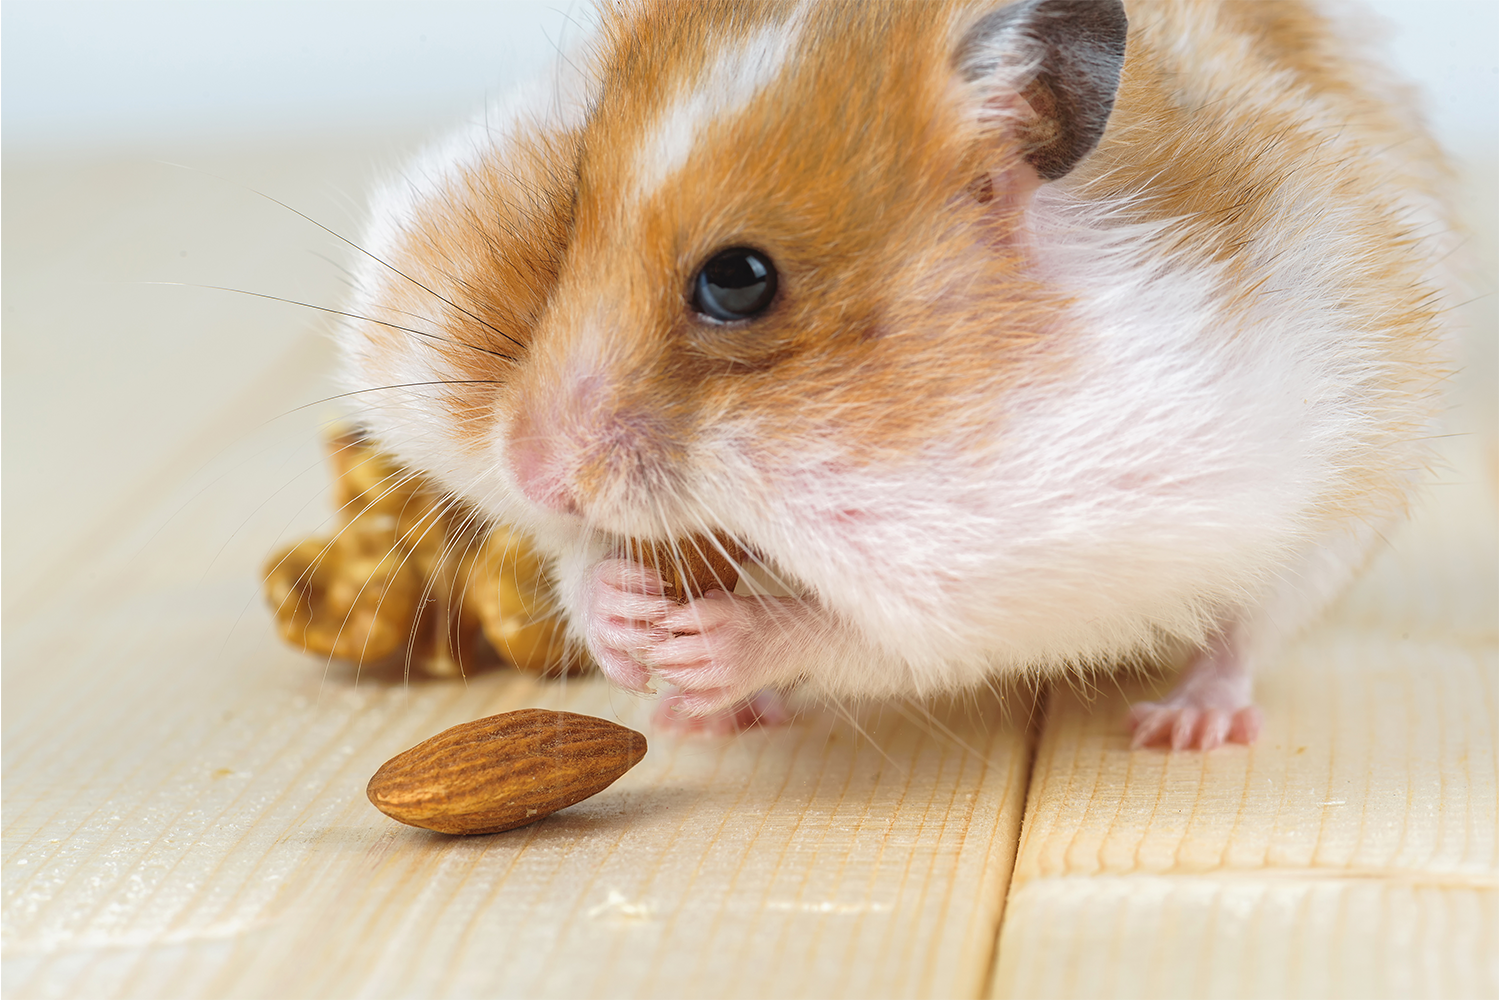 What Do Hamsters Eat? A Hamster's Diet From A to Z